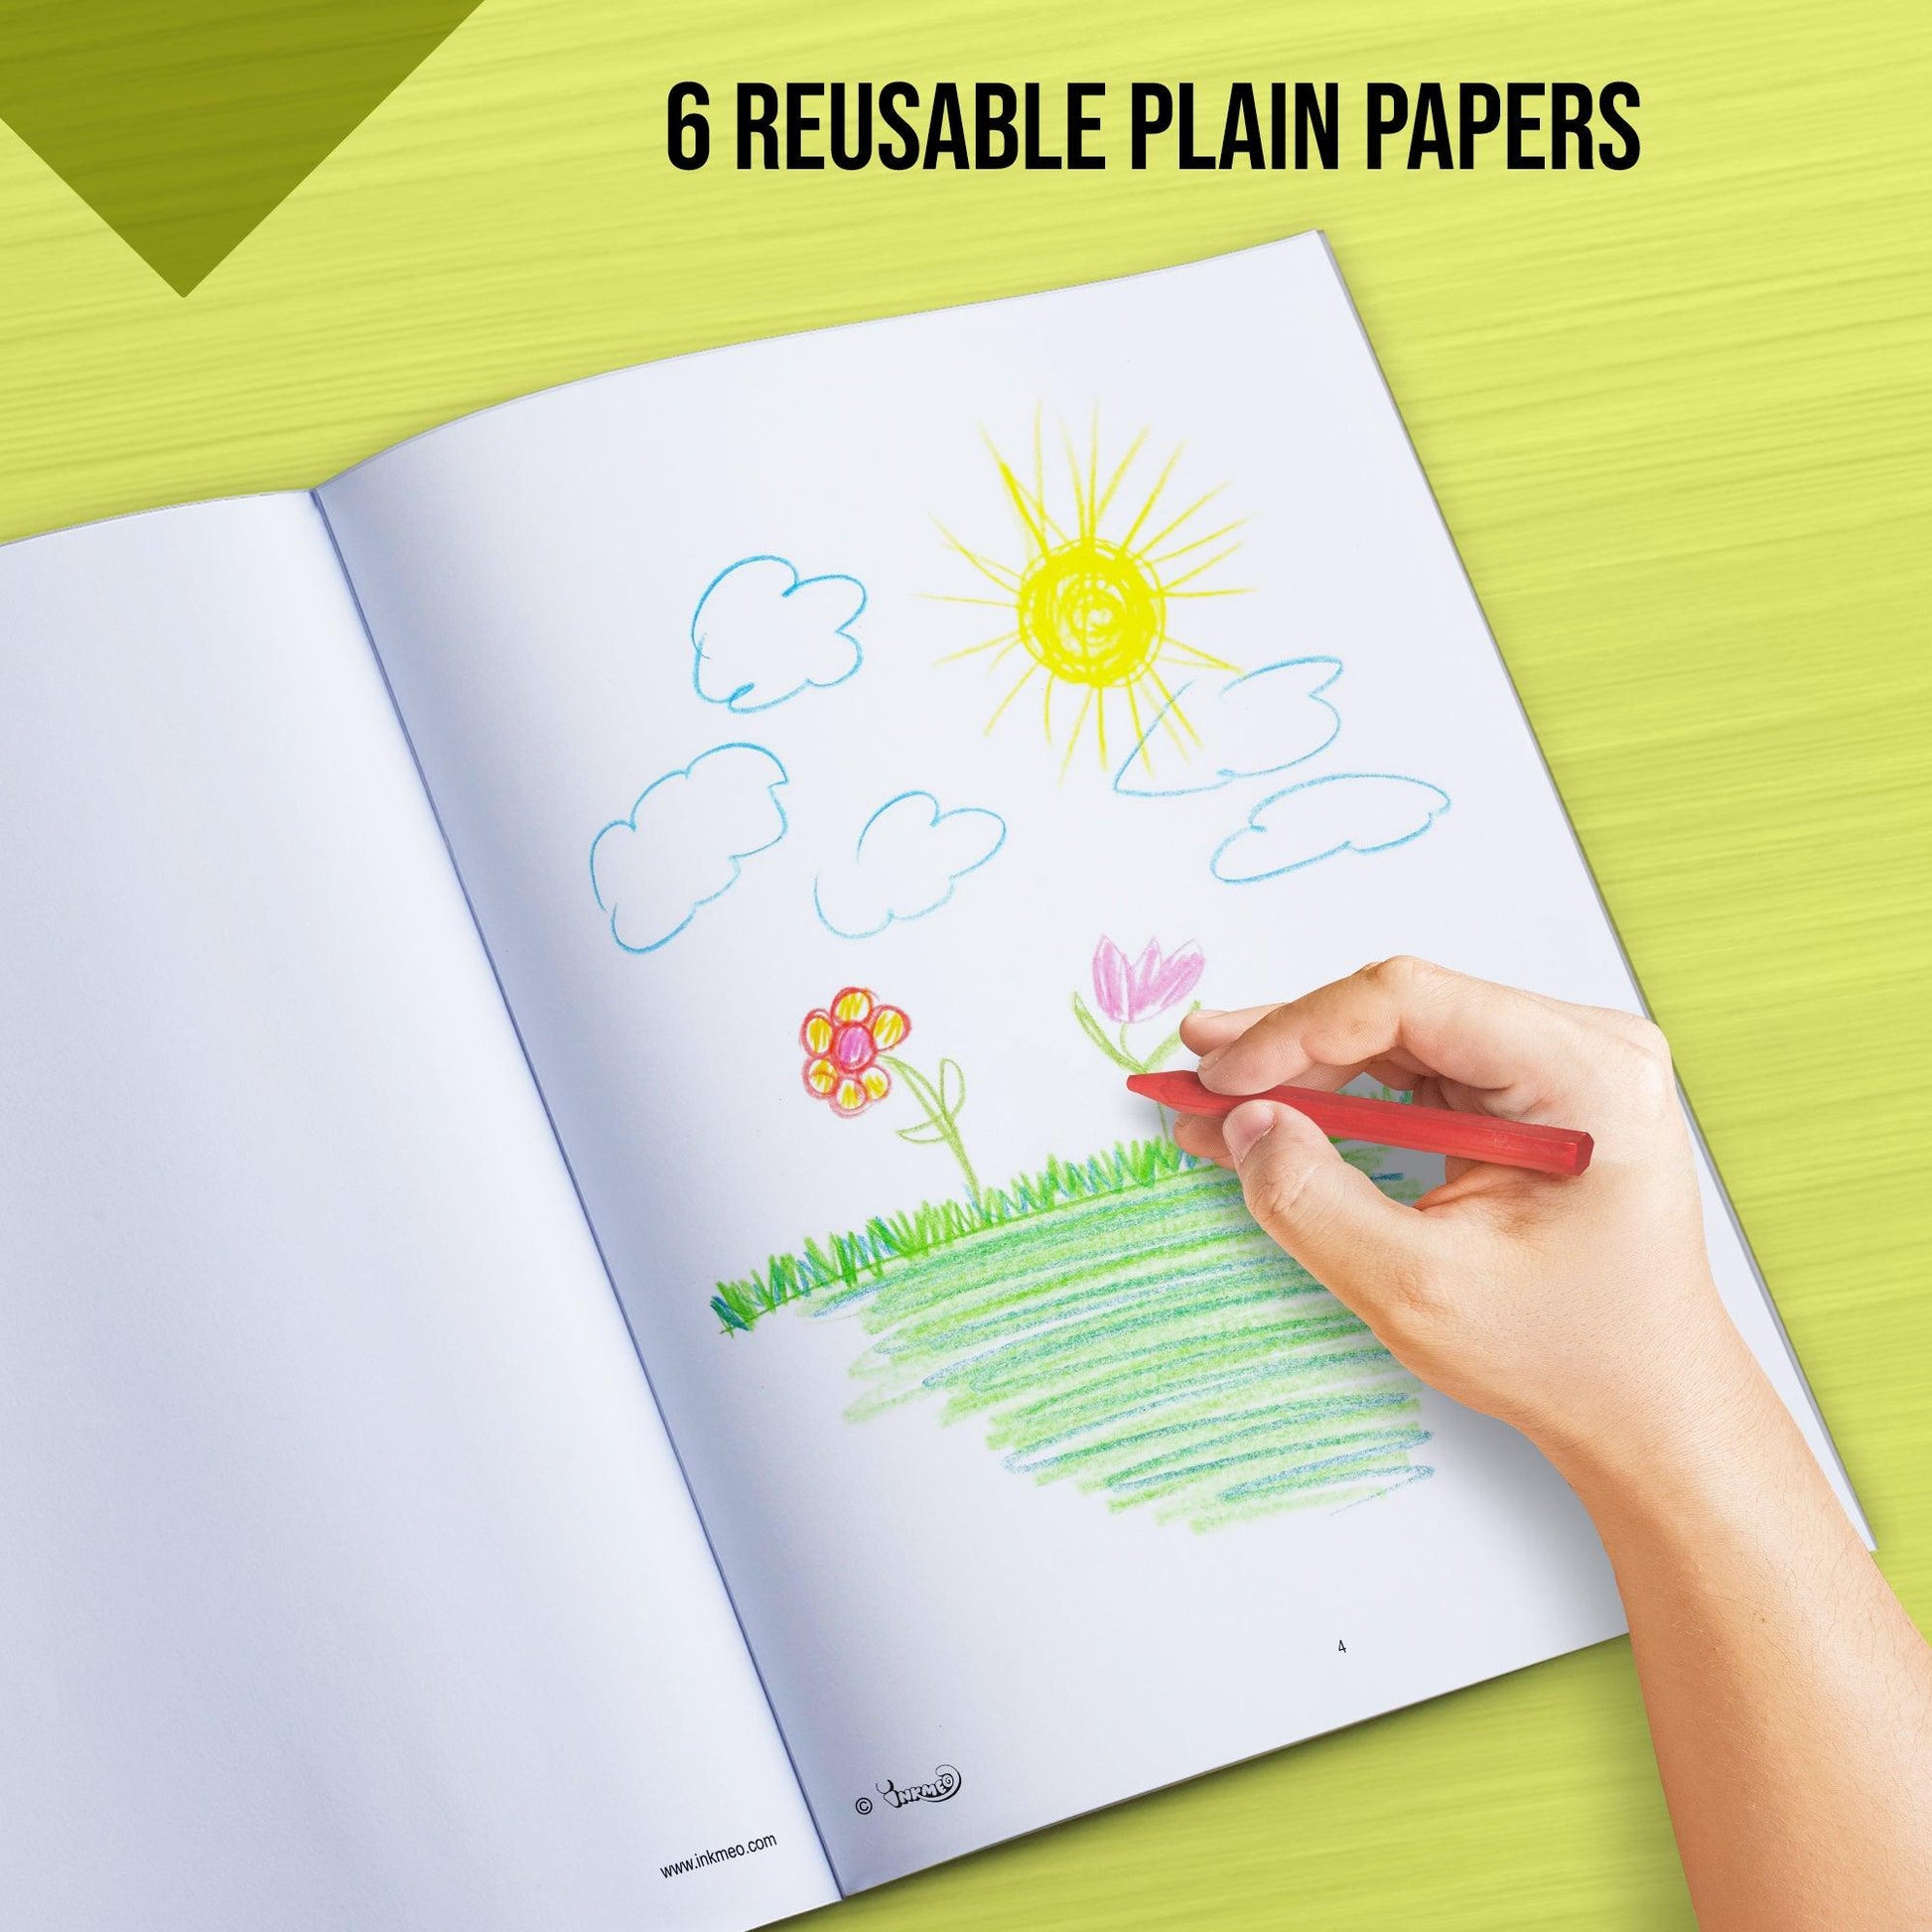 the image shows a hand randomly drawing in the paper and also text description of 6 reusable plain papers.